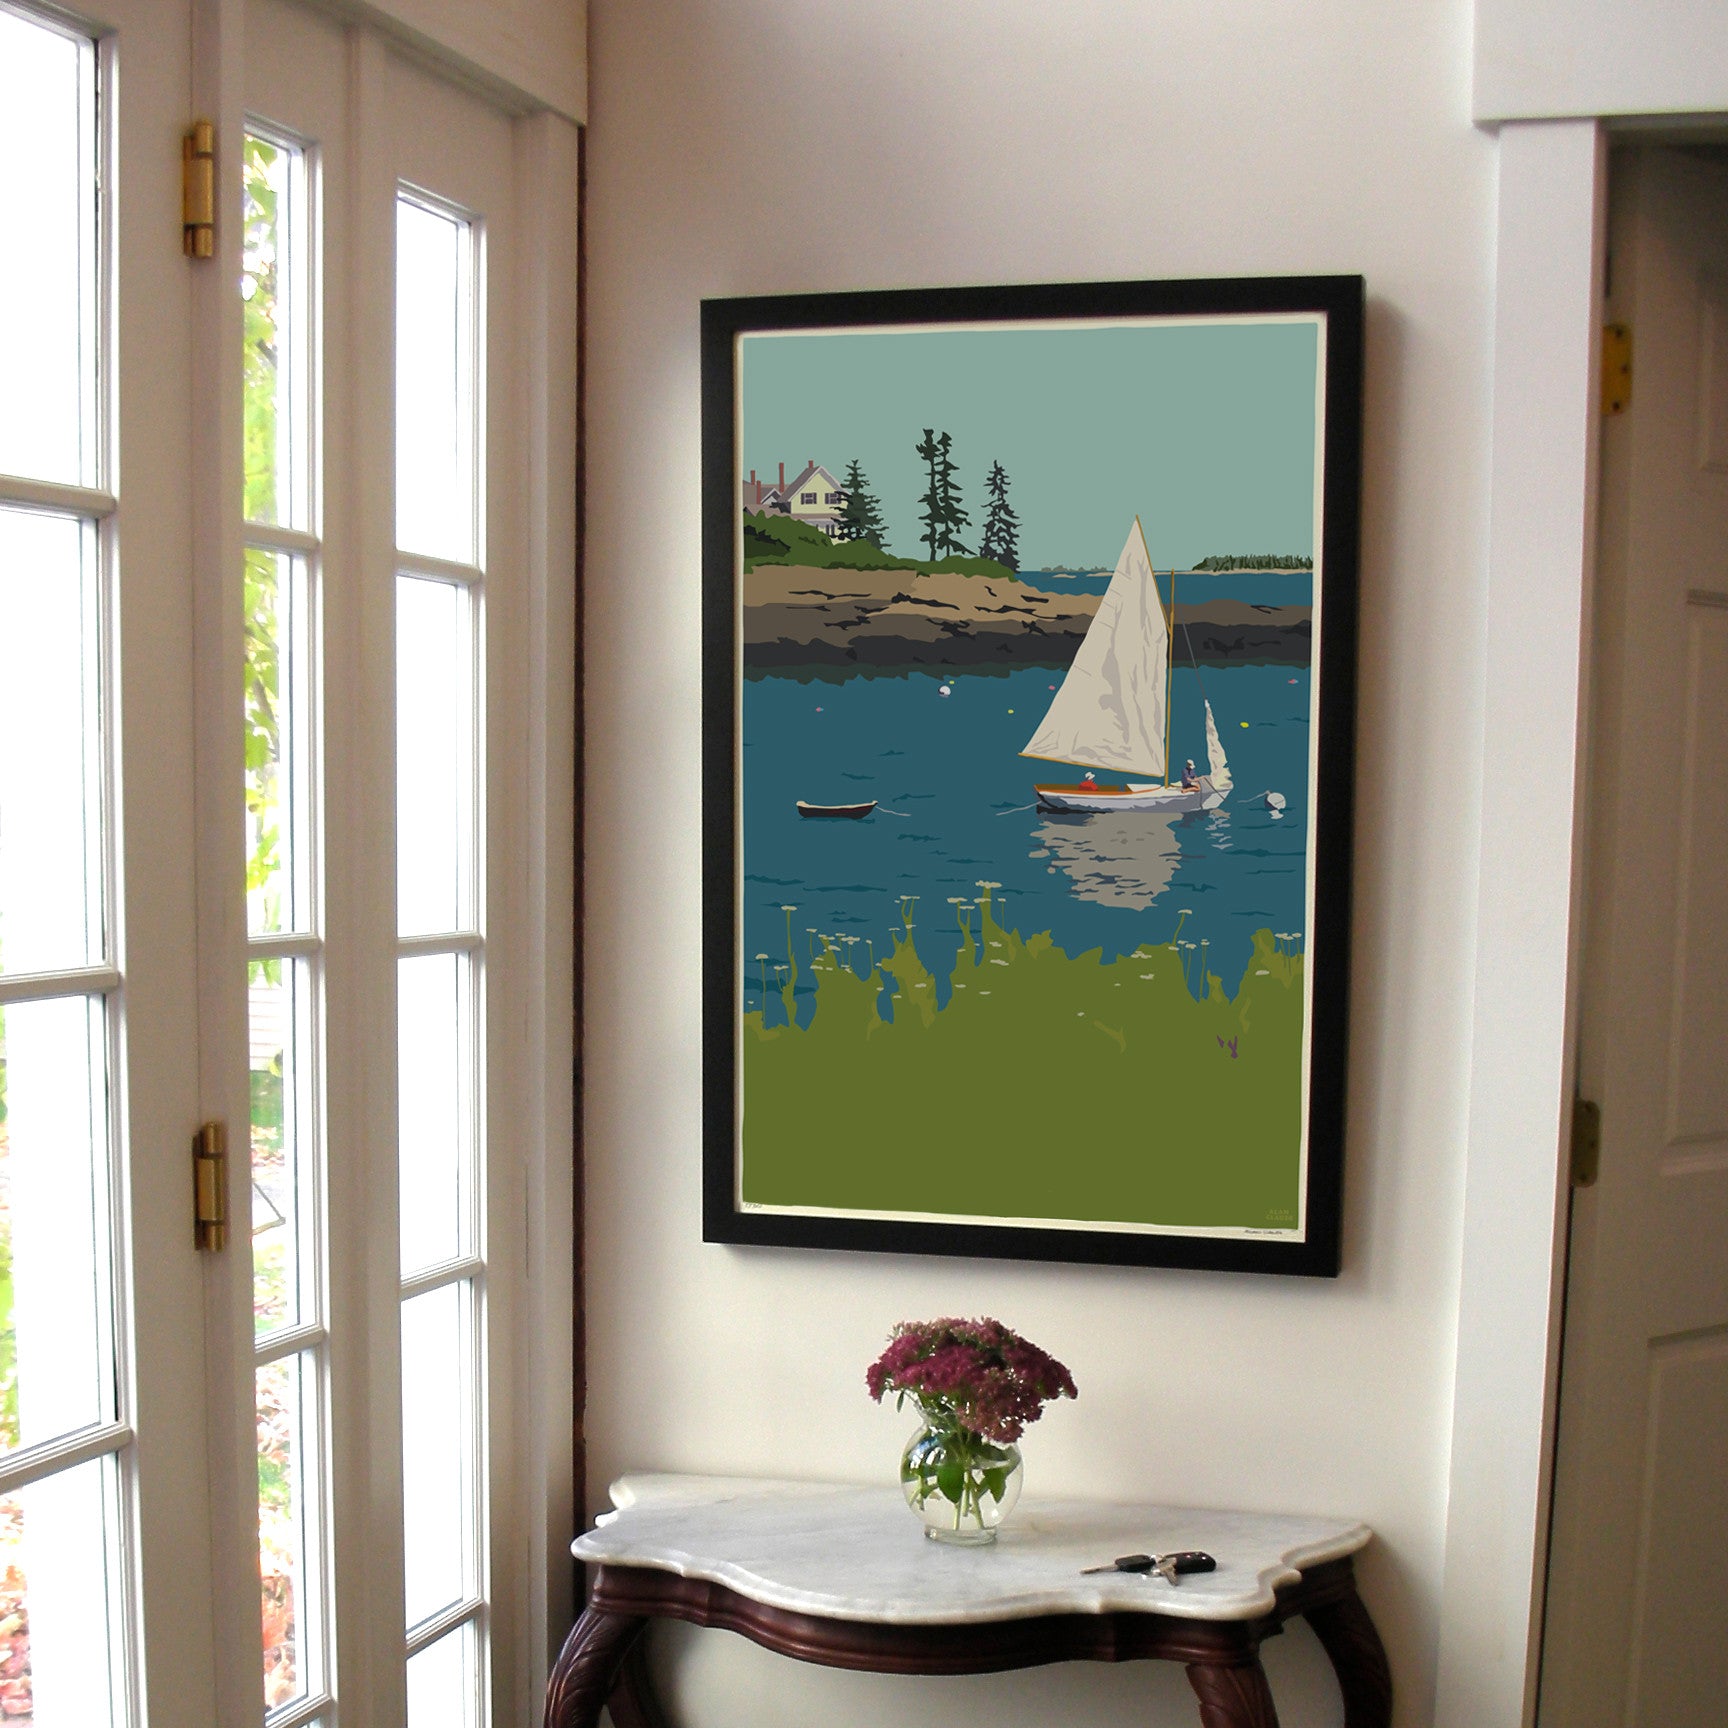 Sailing Long Cove Art Print 24" x 36" Framed Wall Poster By Alan Claude  - Maine